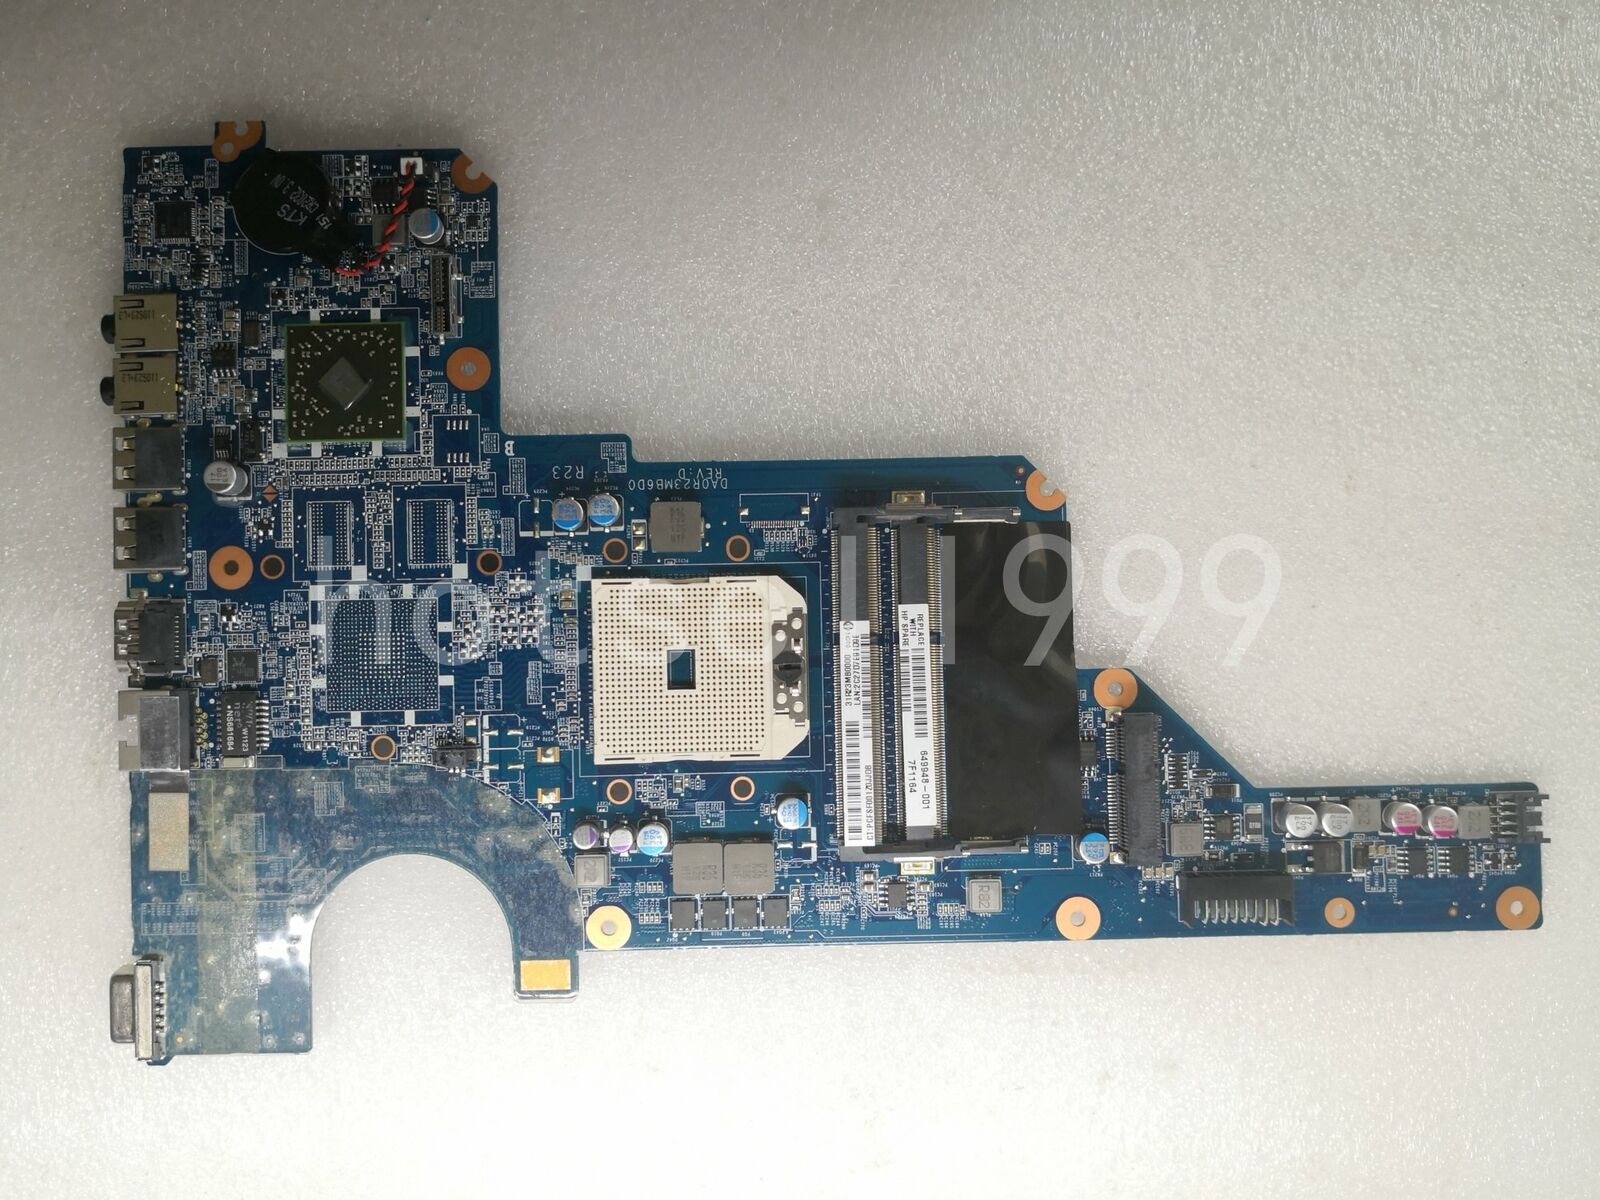 For HP G7 G6 G4 Laptop Motherboard 649948-001 DA0R23MB6D1 Testing ok Brand: HP Number of Memory Slots: 2 M